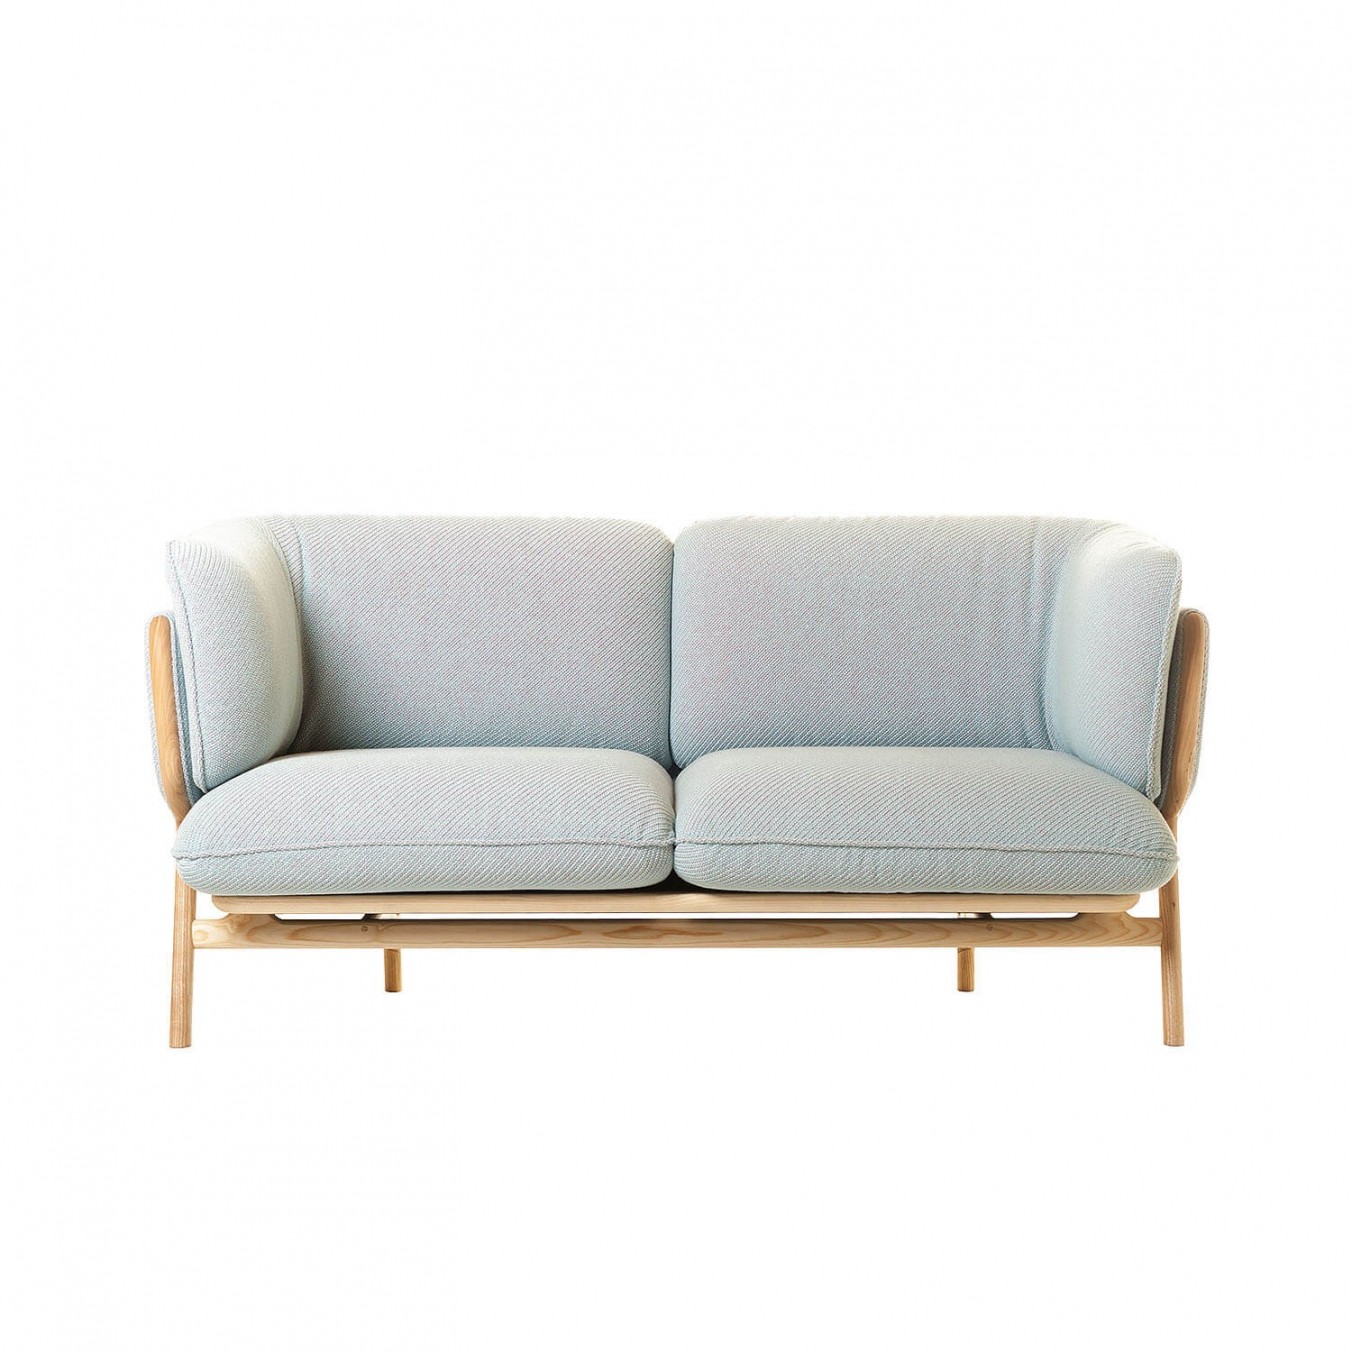 STANLEY 2-SEATER SOFA